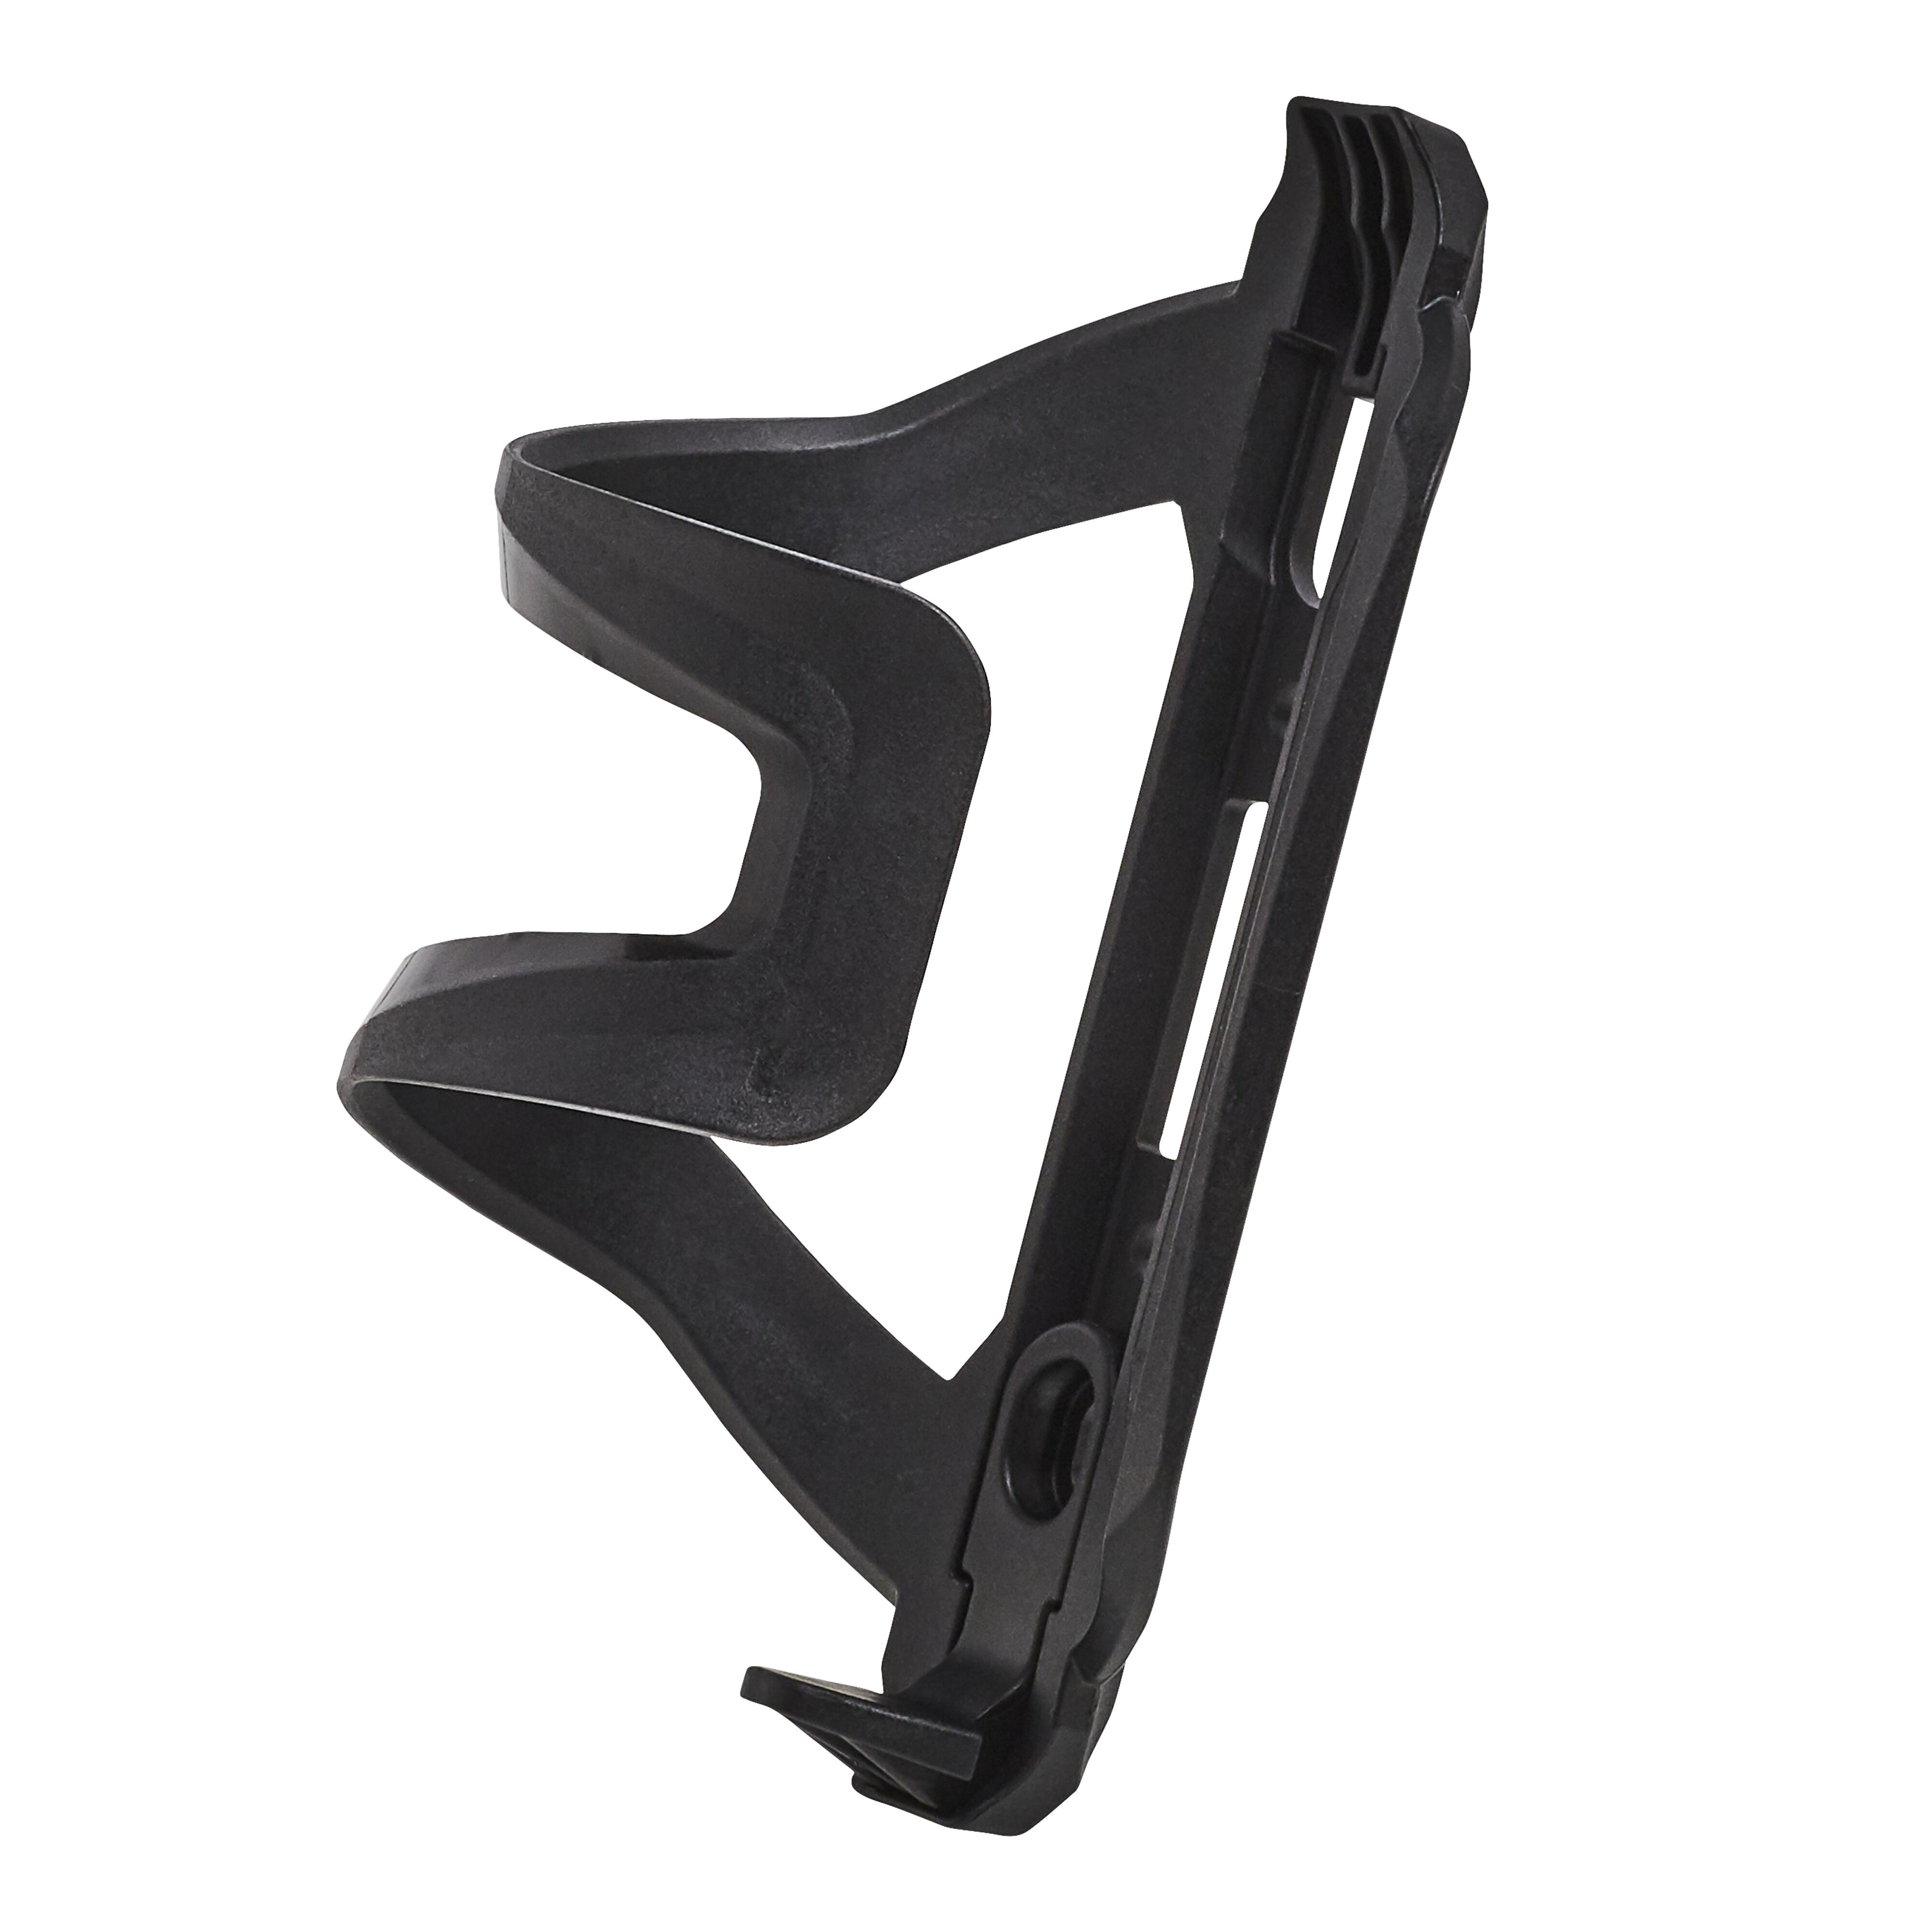 Side access cycling bottle cage - ROCKRIDER